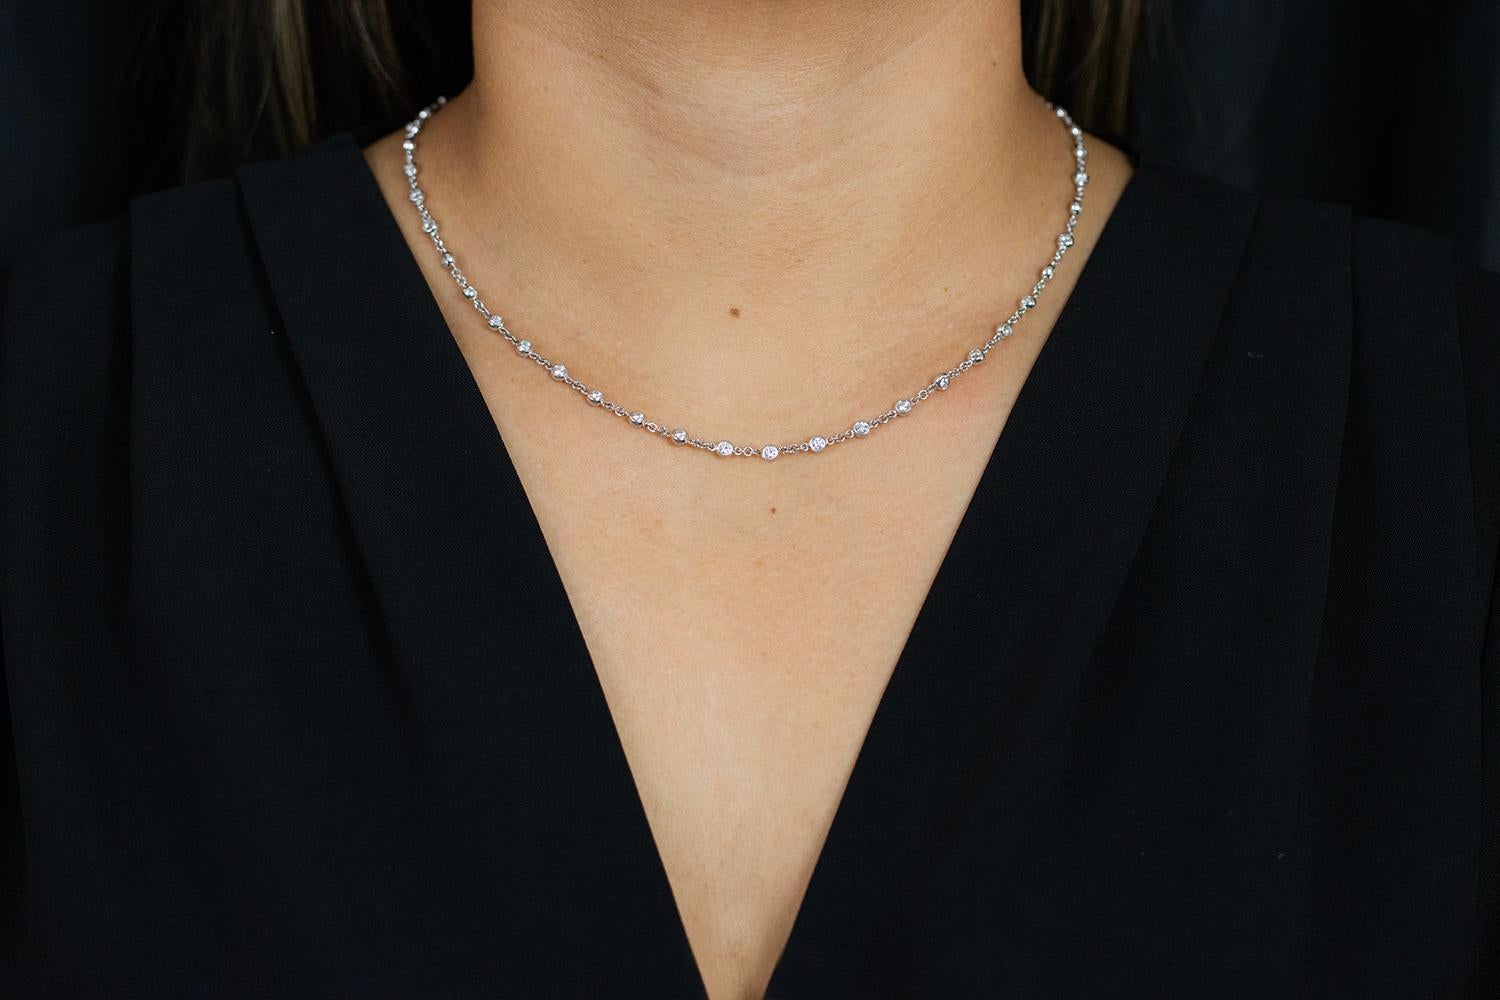 Simple in aesthetics and marvelously designed, this diamonds by the yard necklace will surely elevate any style. Showcases 47 sparkling round diamonds bezel set and evenly spaced in a 14k white gold chain. A versatile piece perfect for